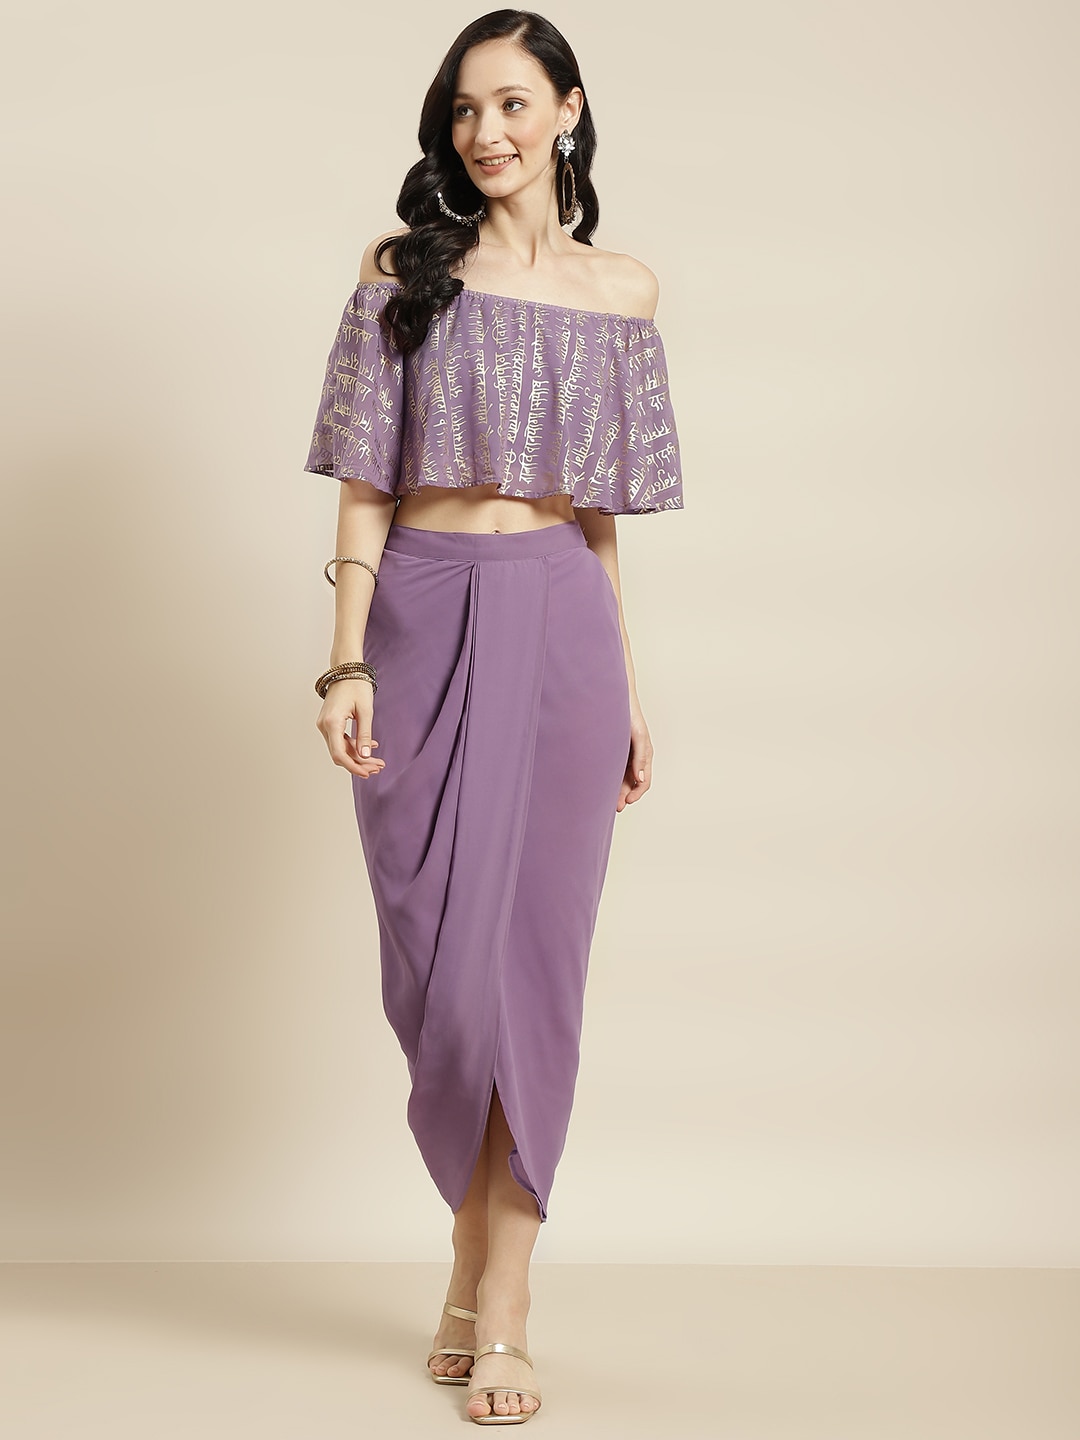 Shae by SASSAFRAS Purple Foil Crop Top With Dhoti Skirt Price in India